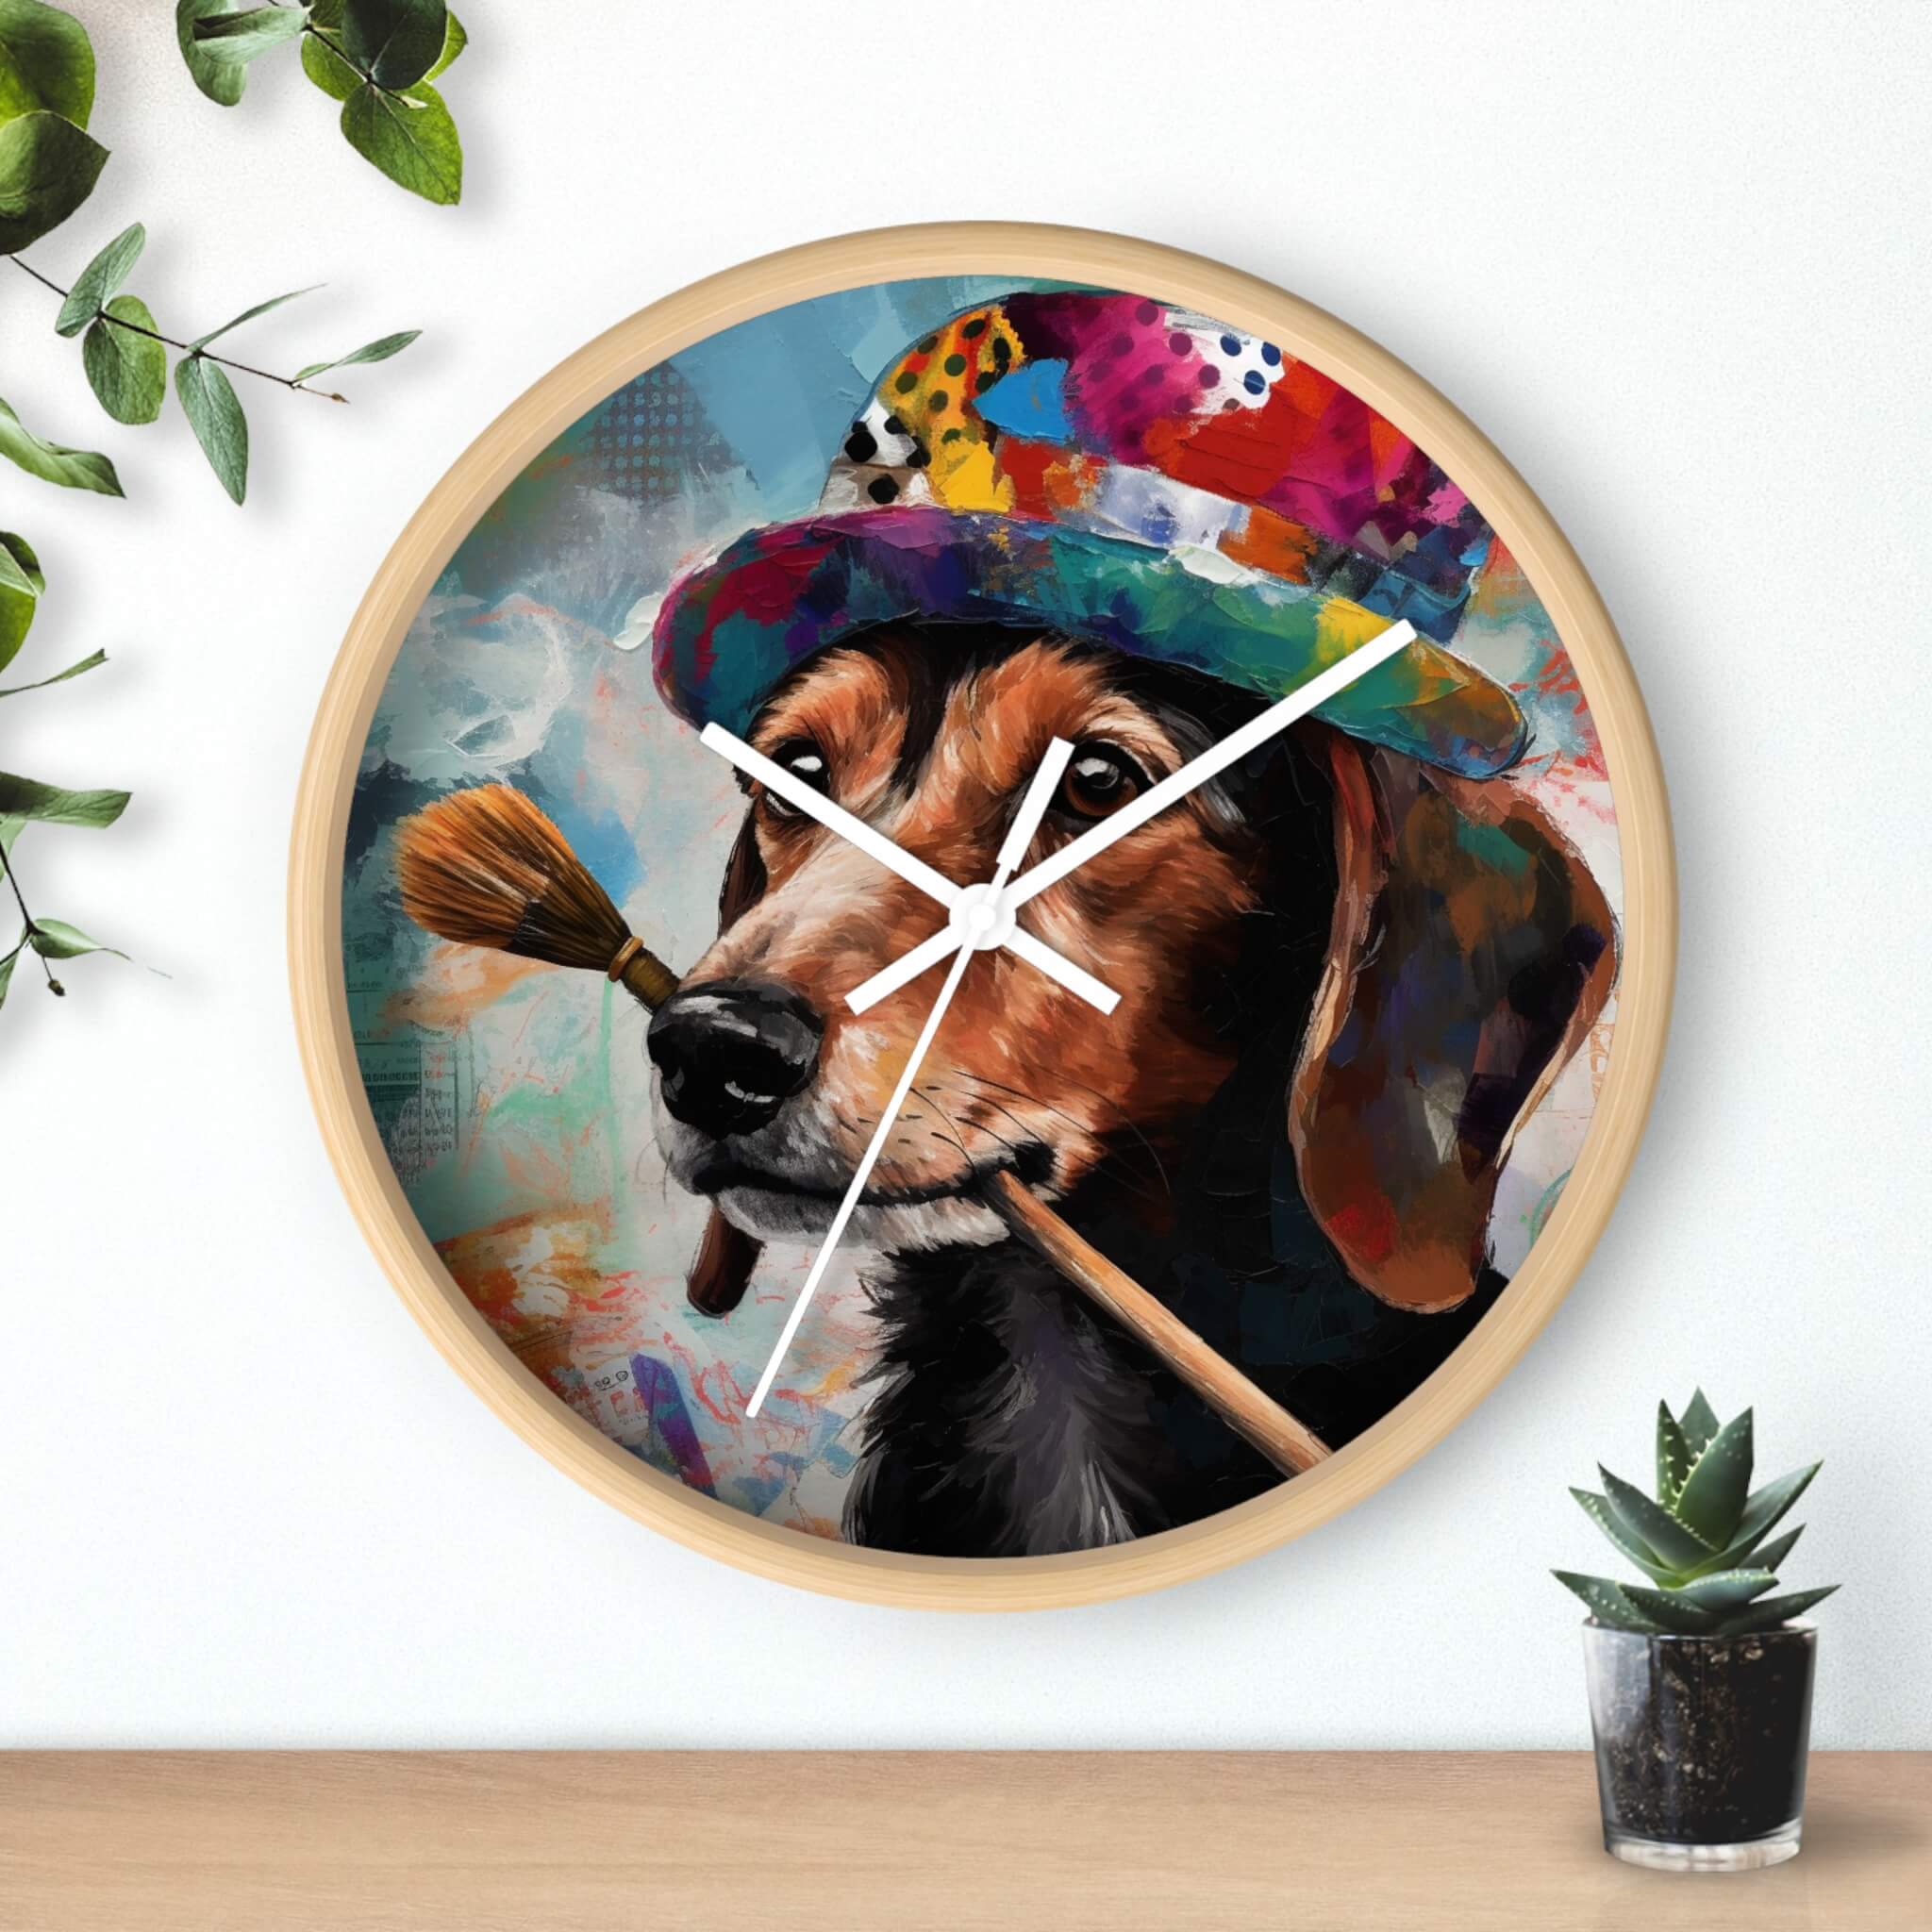 Dachshund Wall Clocks: Adding Playful Punctuality to Your Décor with Wiener Dog Style